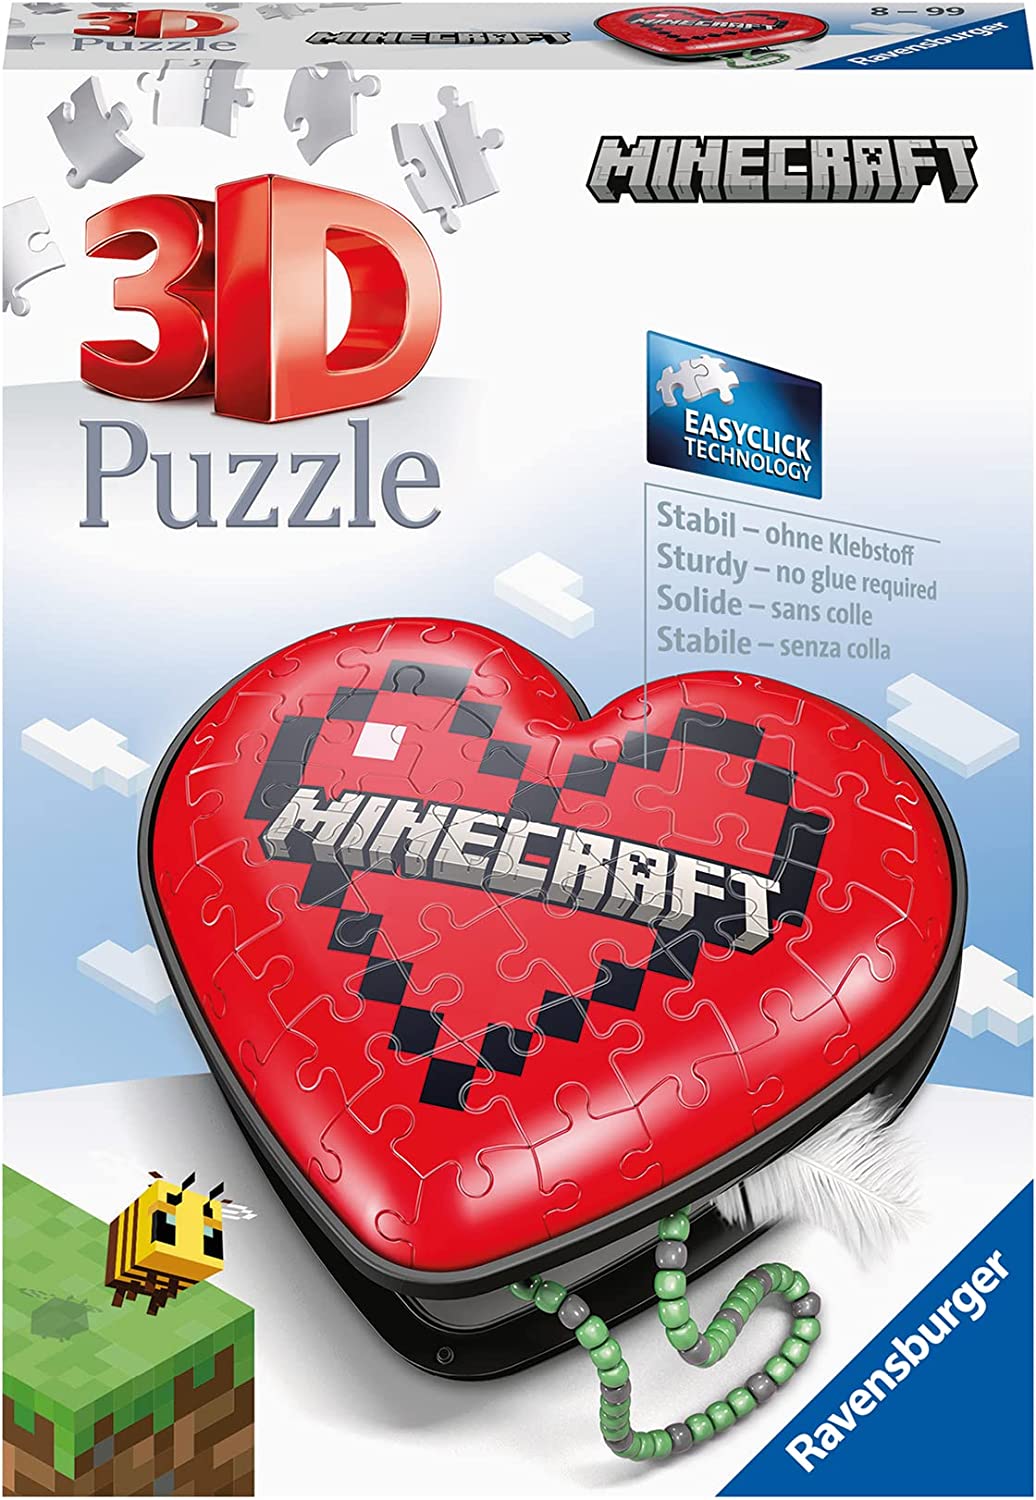 Craft The Perfect Minecraft Jigsaw Puzzle